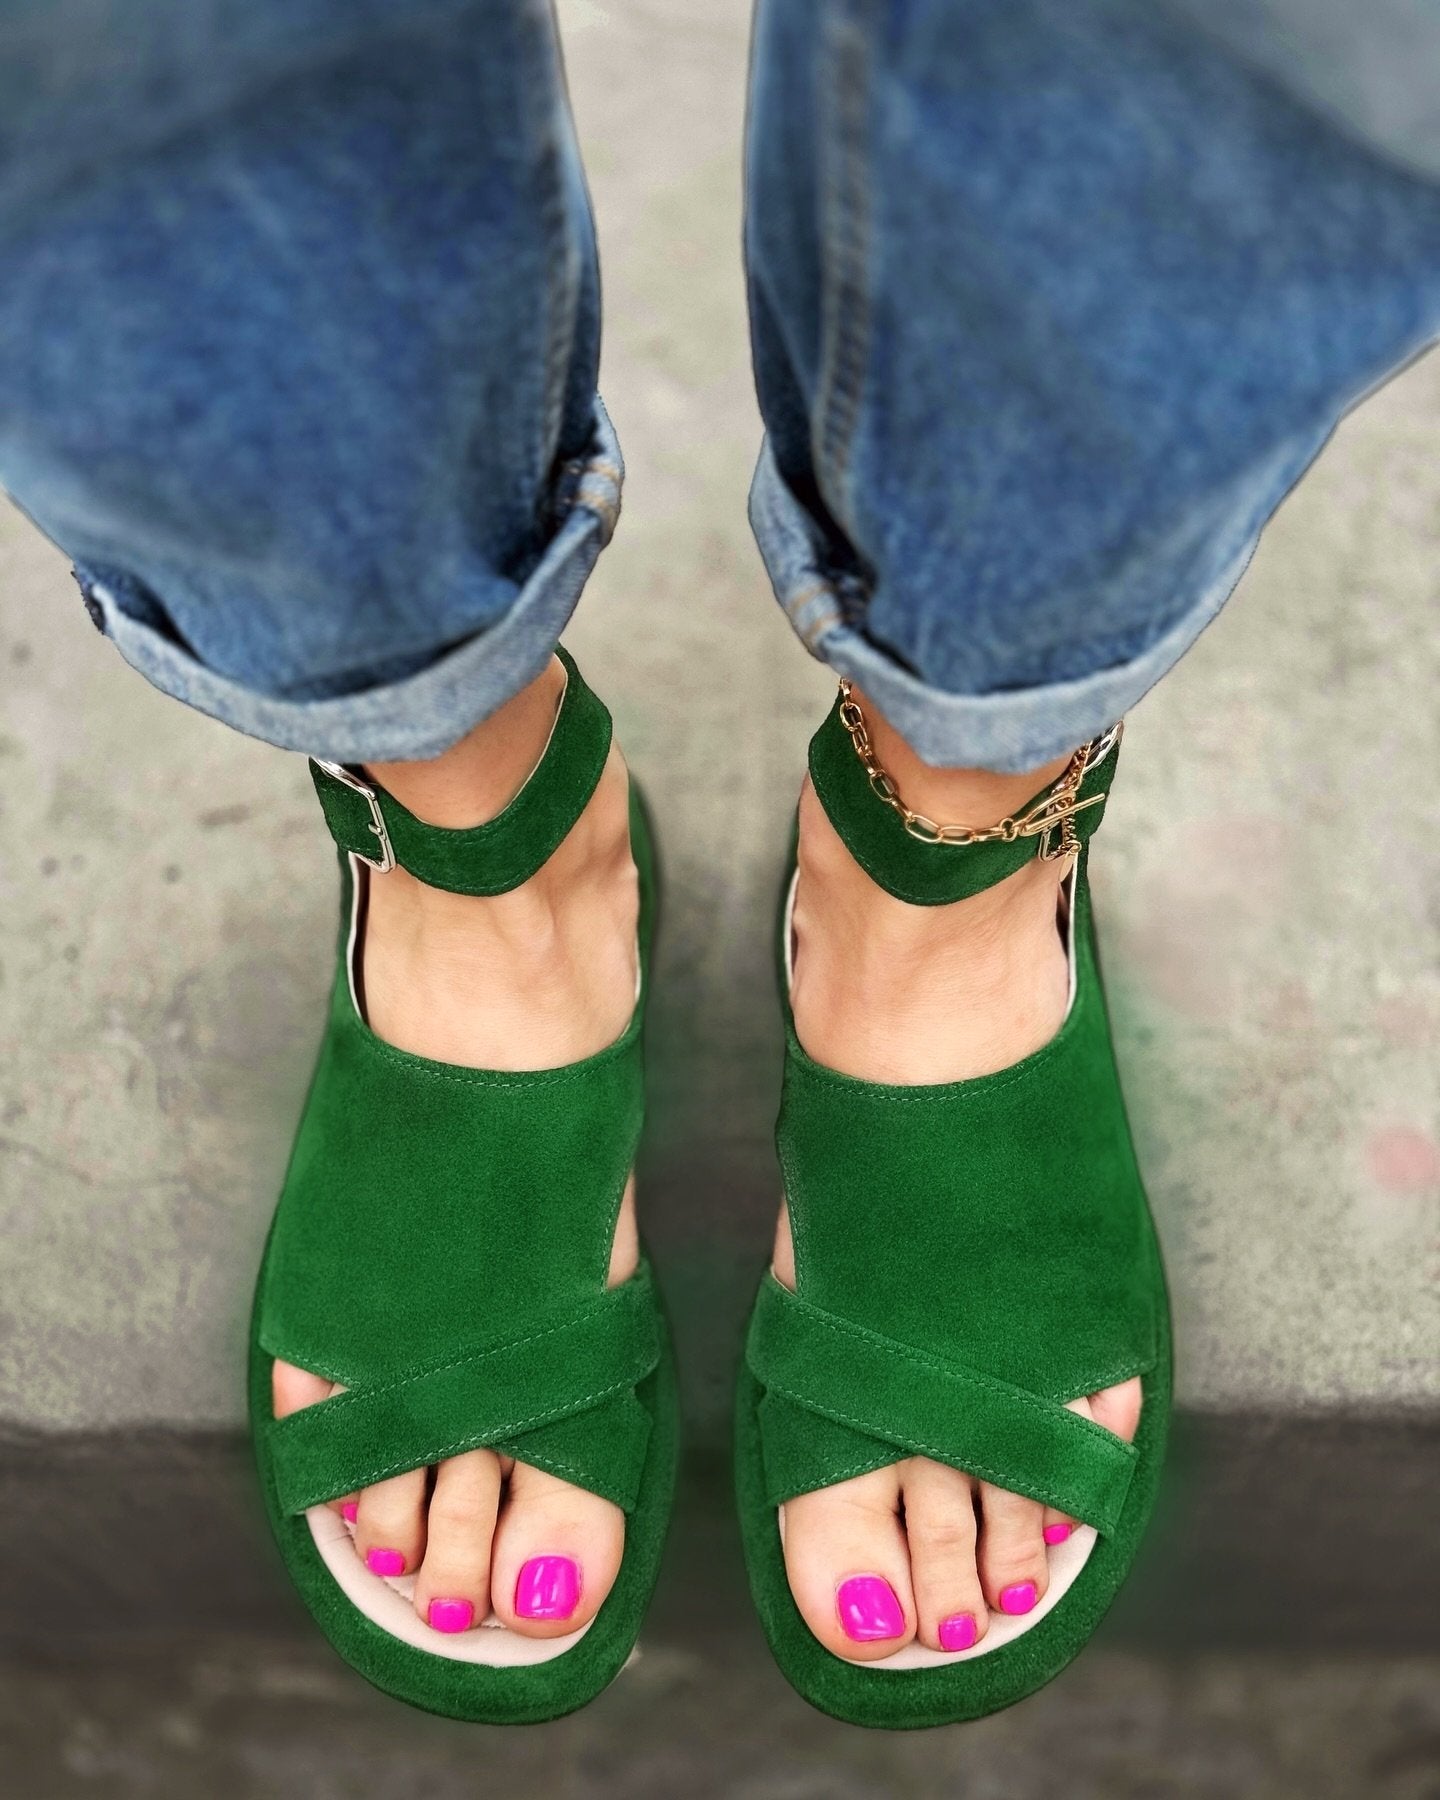 The Chic Colorful Flat Shoes